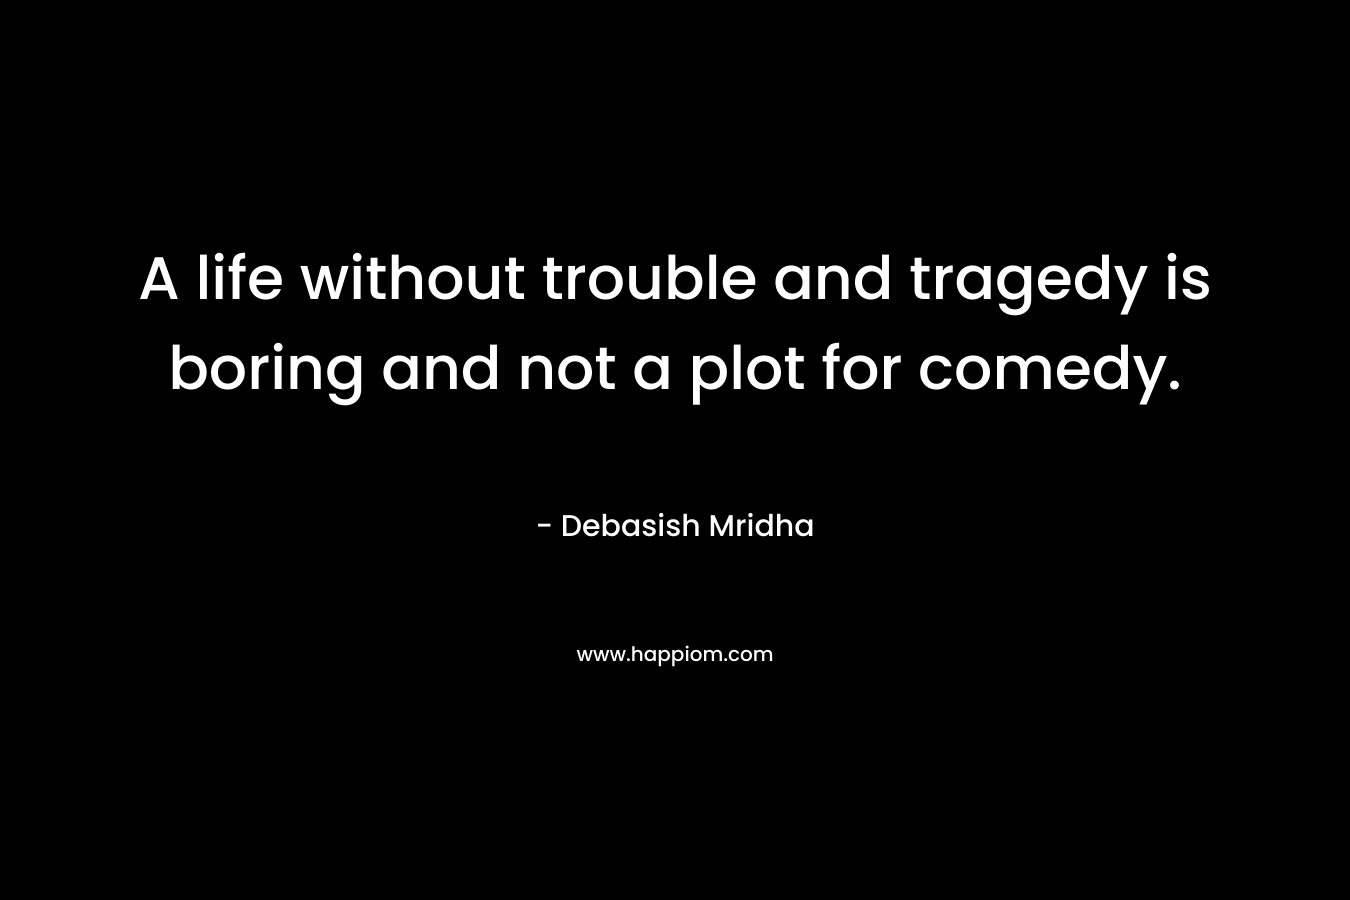 A life without trouble and tragedy is boring and not a plot for comedy. – Debasish Mridha